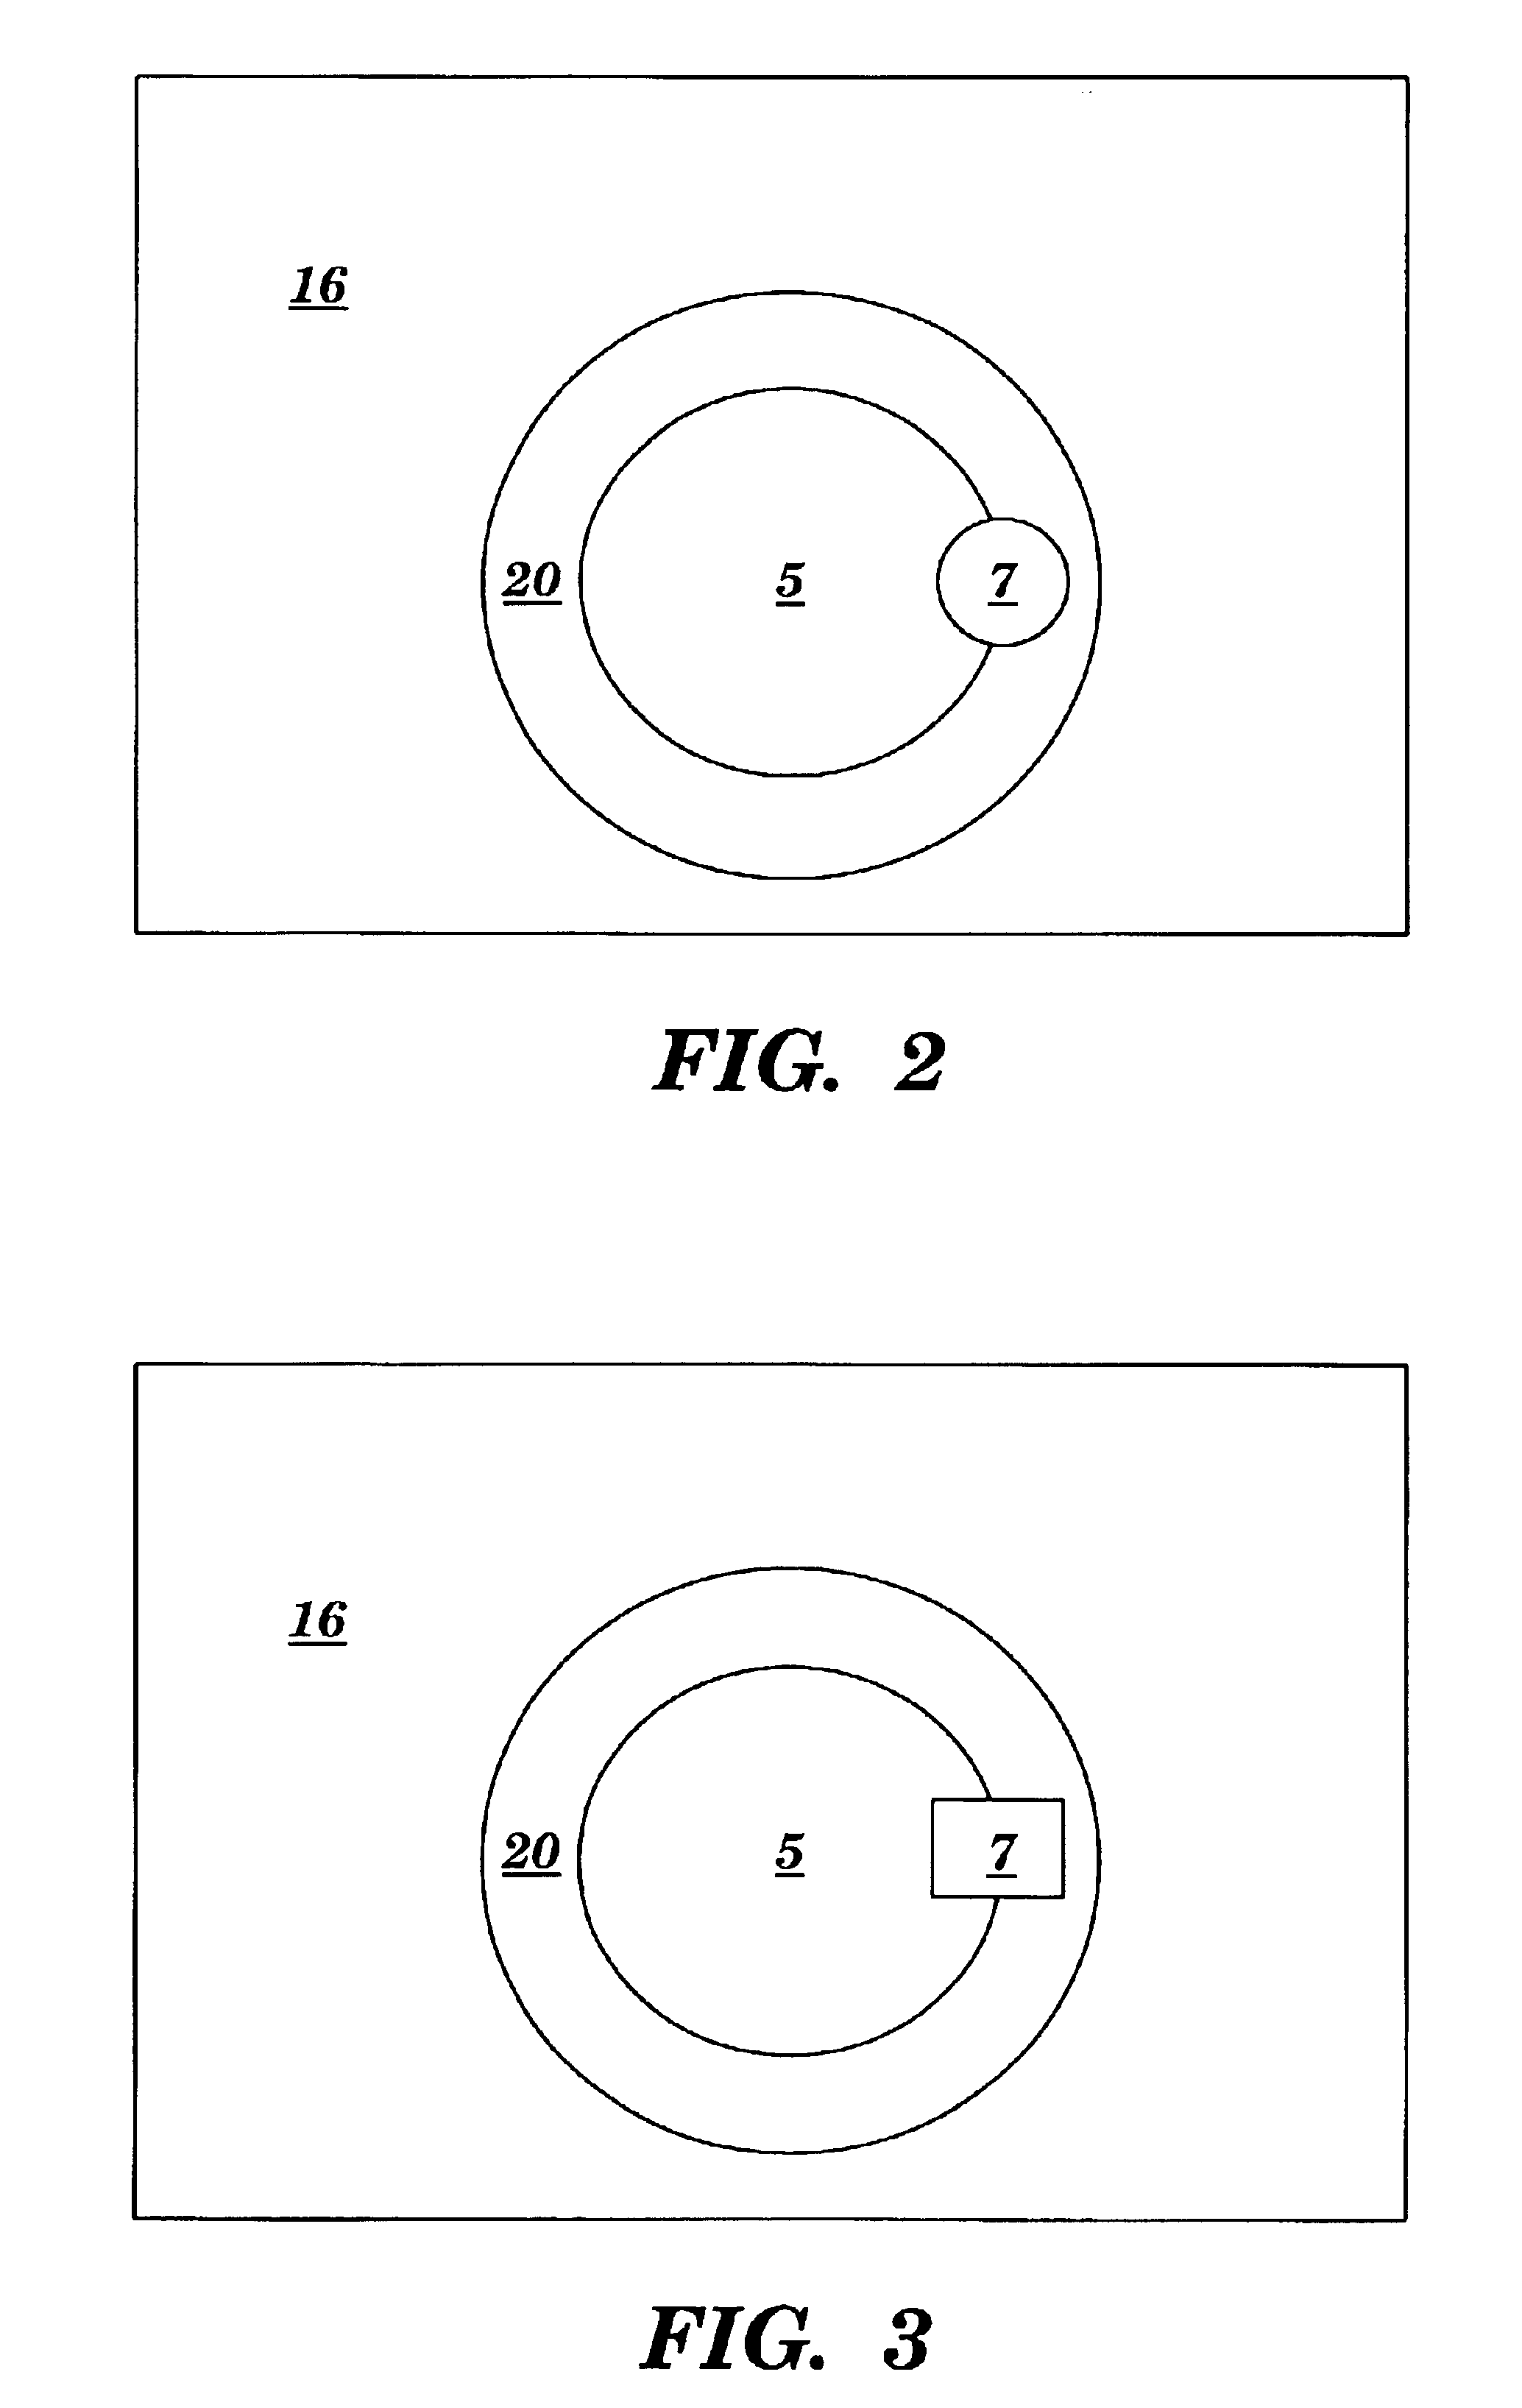 Membrane probe with anchored elements